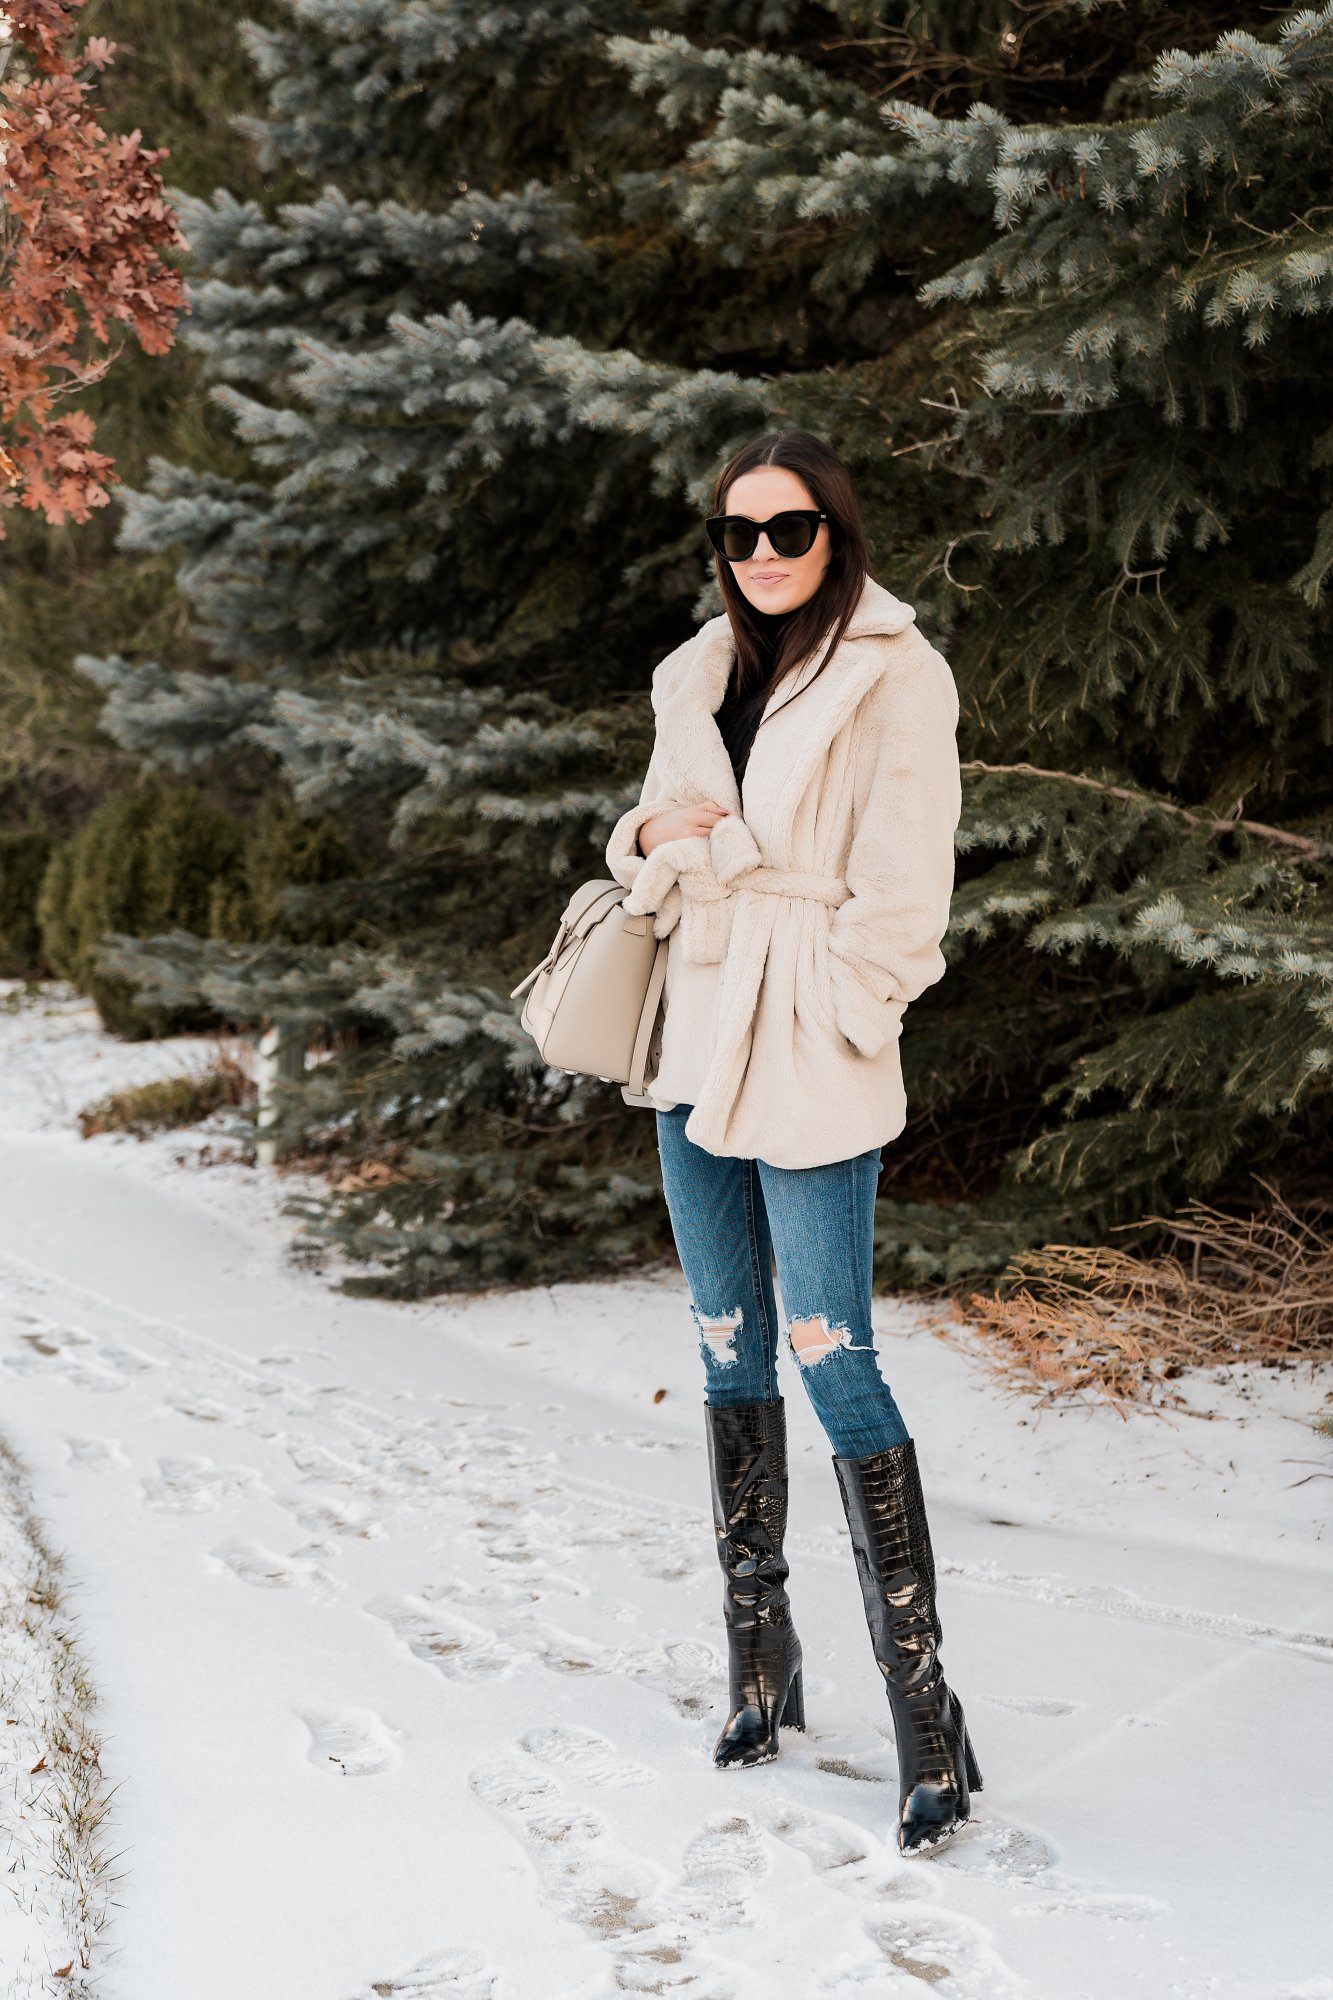 Cozy Coats and Boots...